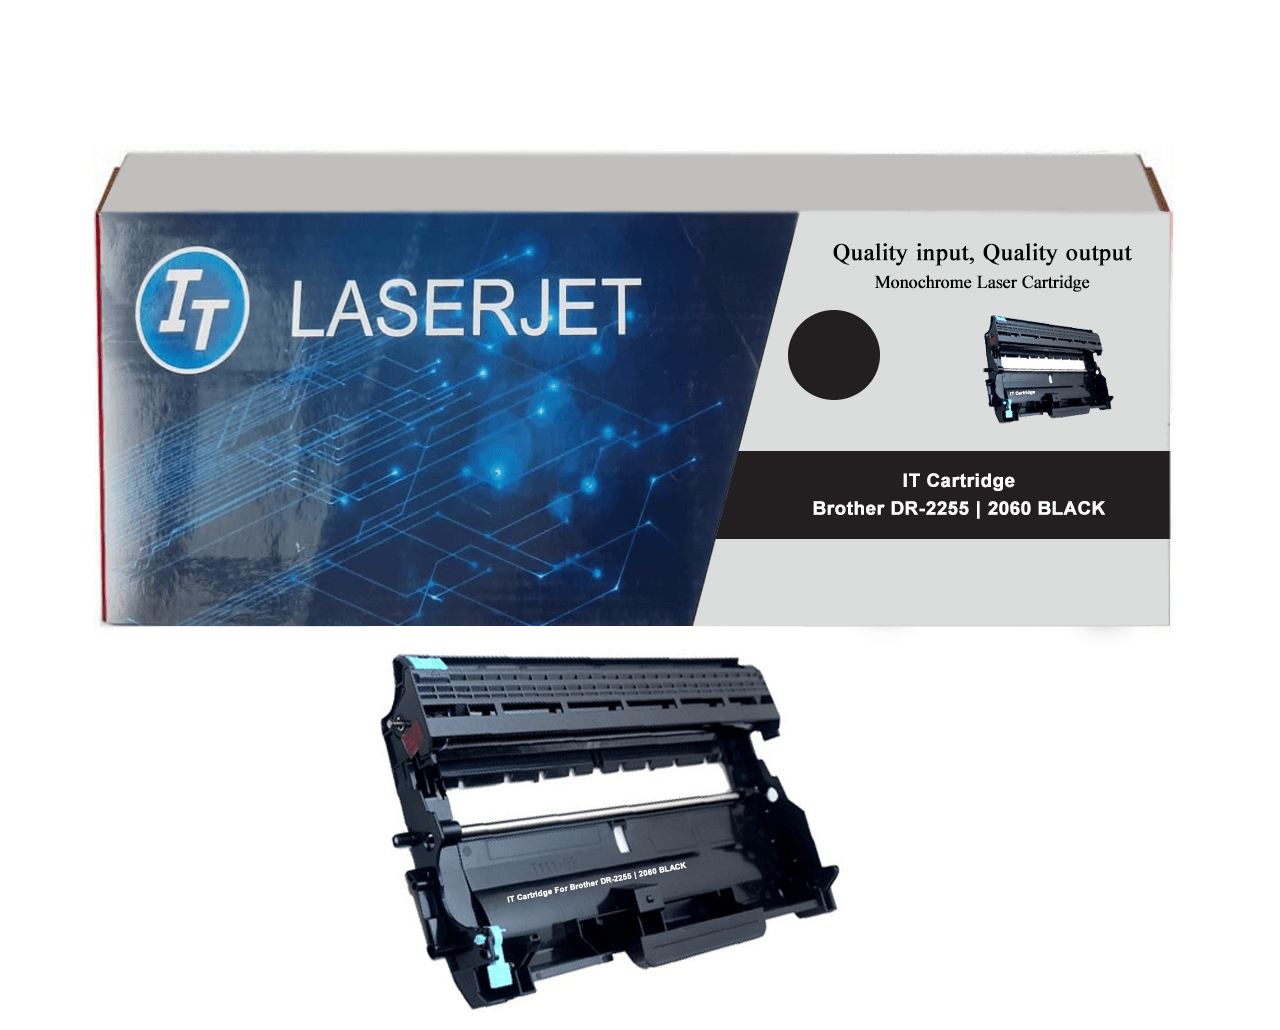 IT Toner Cartridge BROTHER DR-2255,2060 (28).png